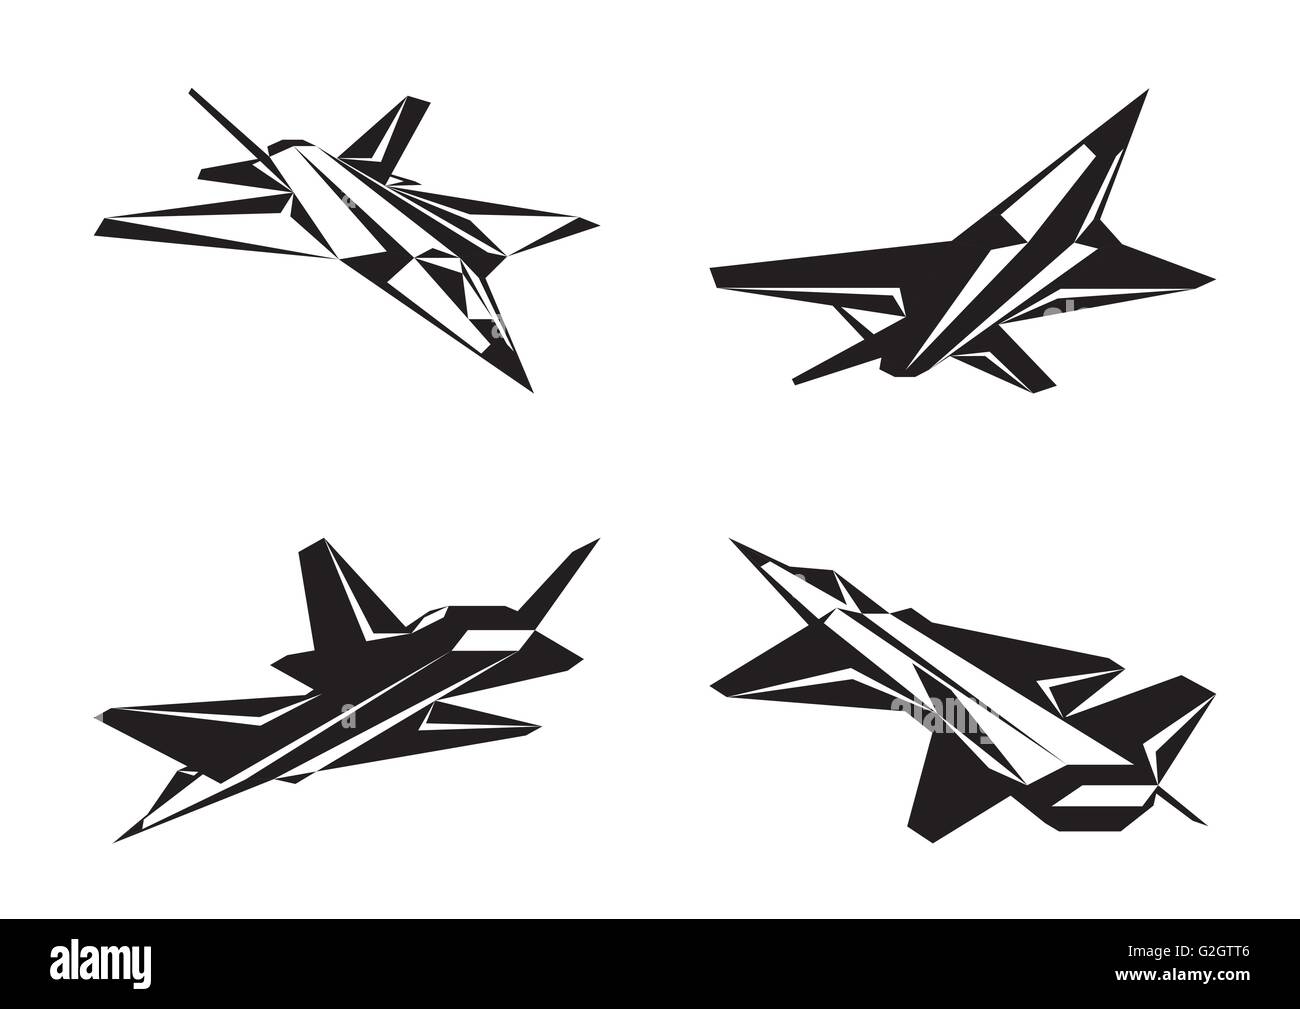 Military aircraft in perspective - vector illustration Stock Vector